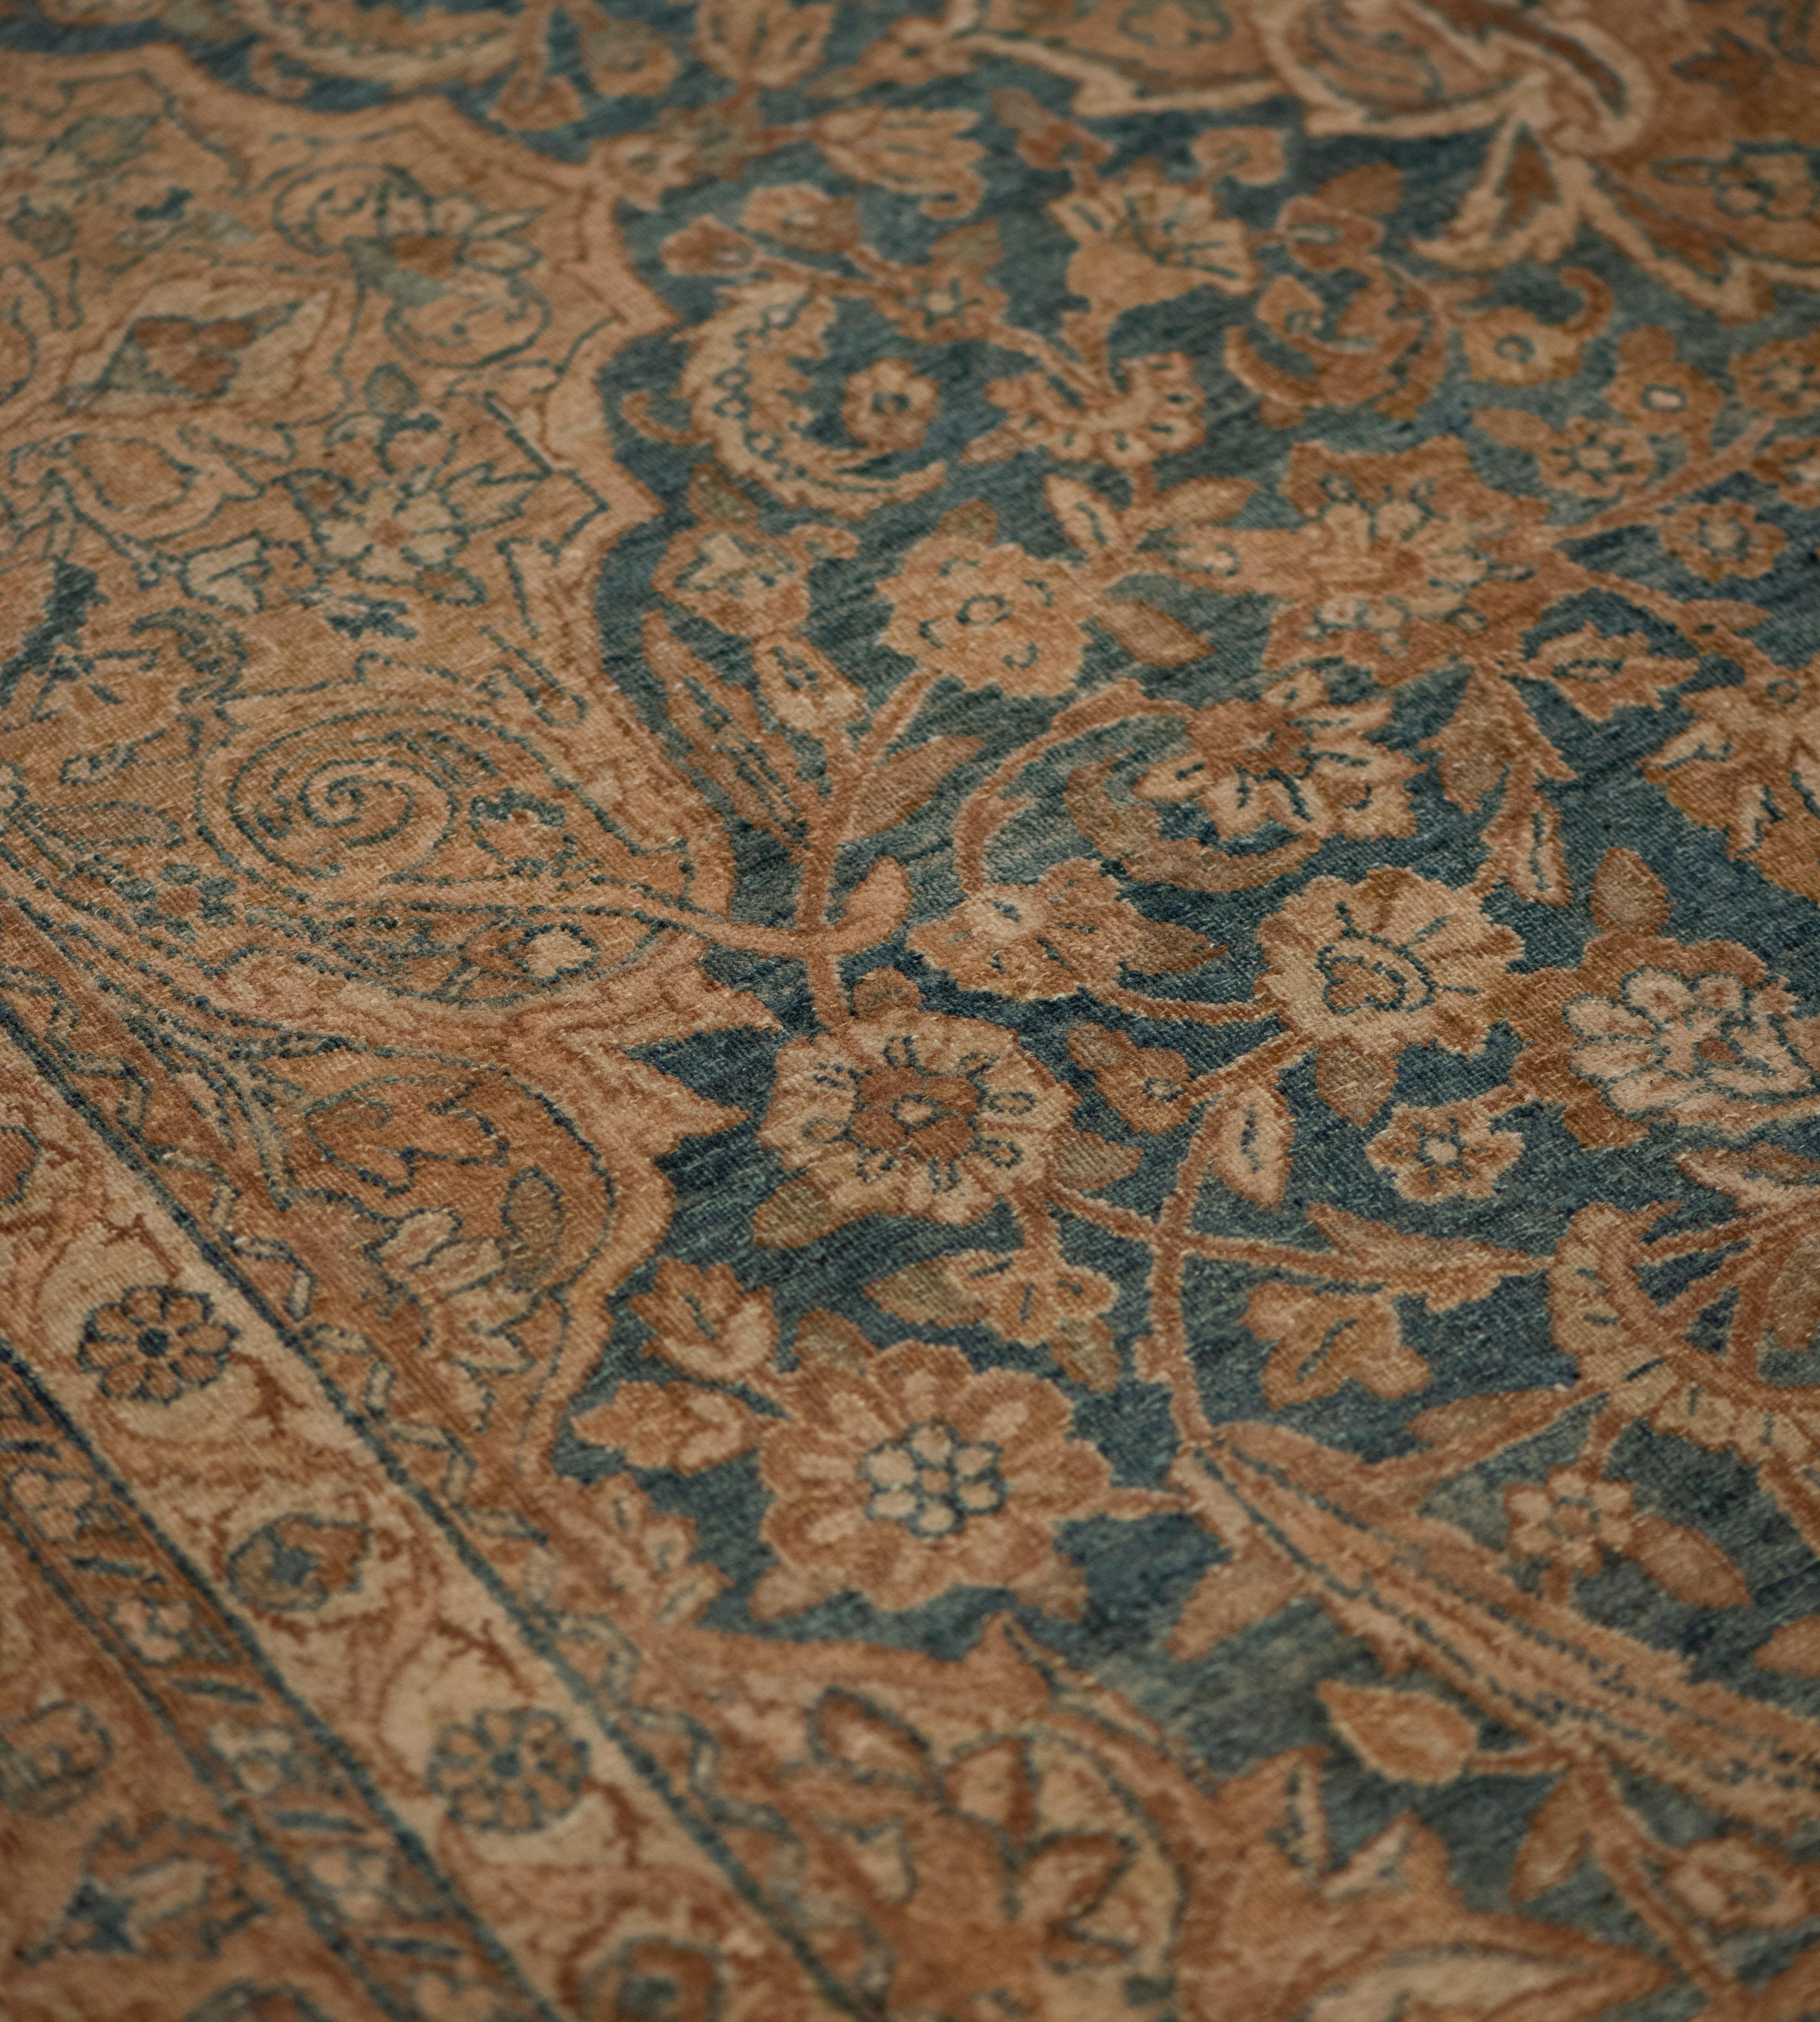 Antique Circa-1900 Floral Persian Kerman Rug In Good Condition For Sale In West Hollywood, CA